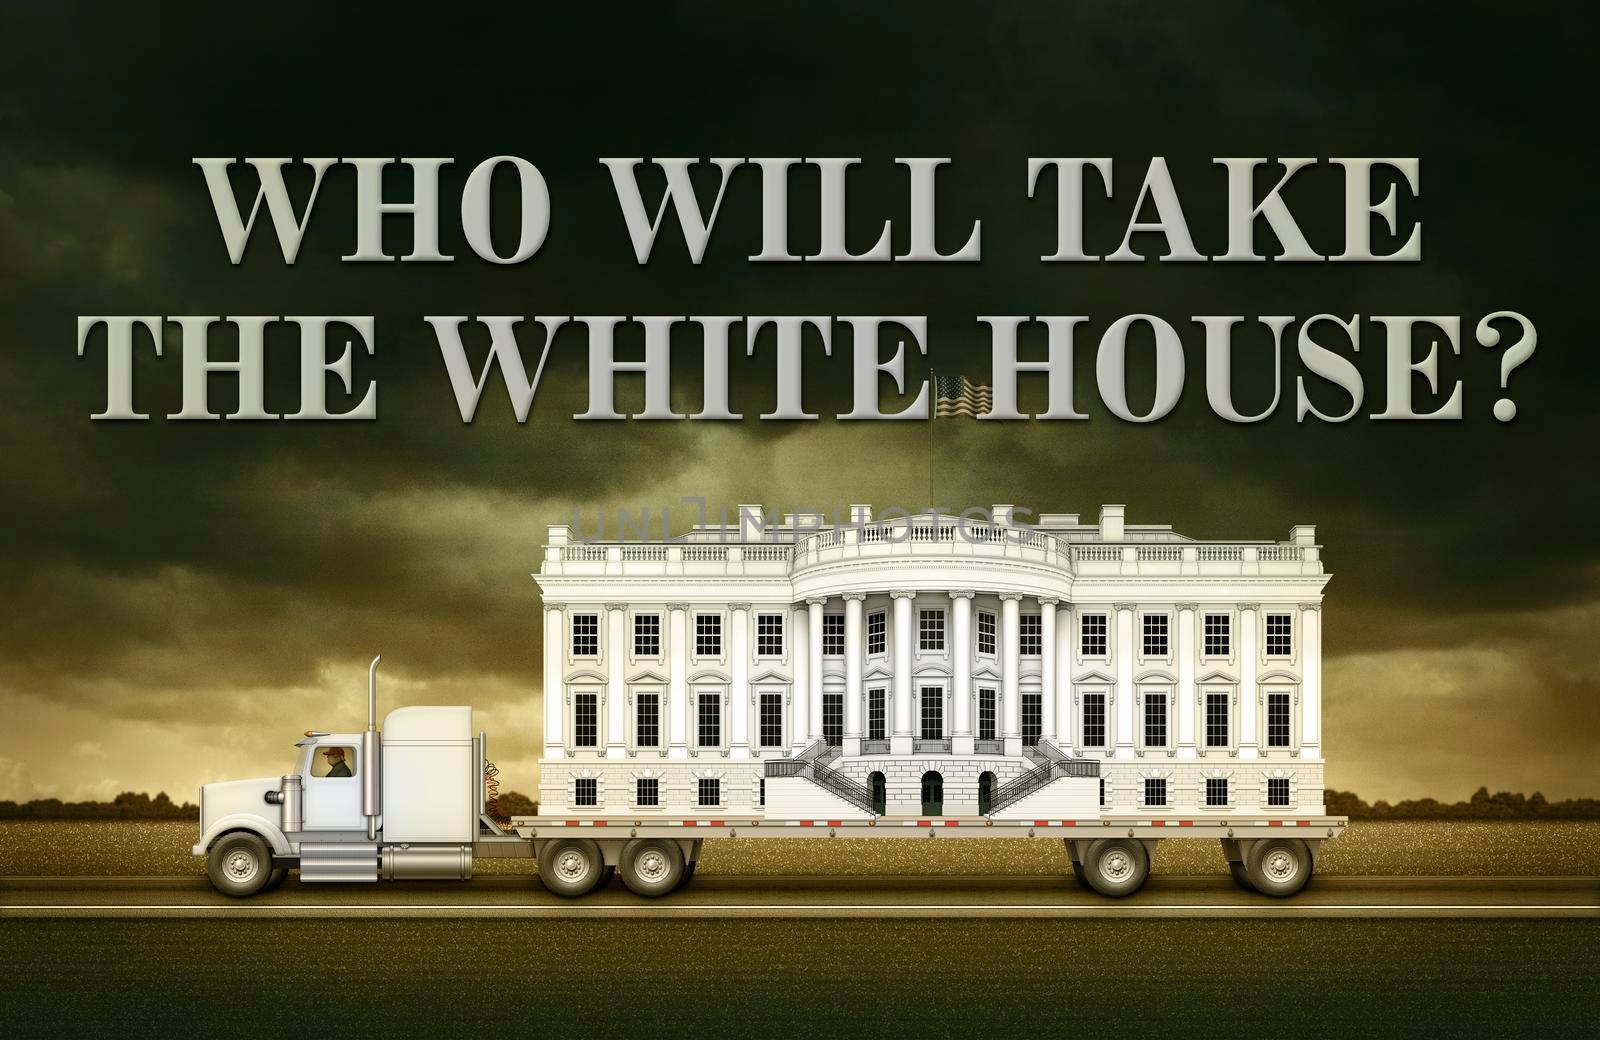 The White House on a flat bed truck. Who will take the White House?